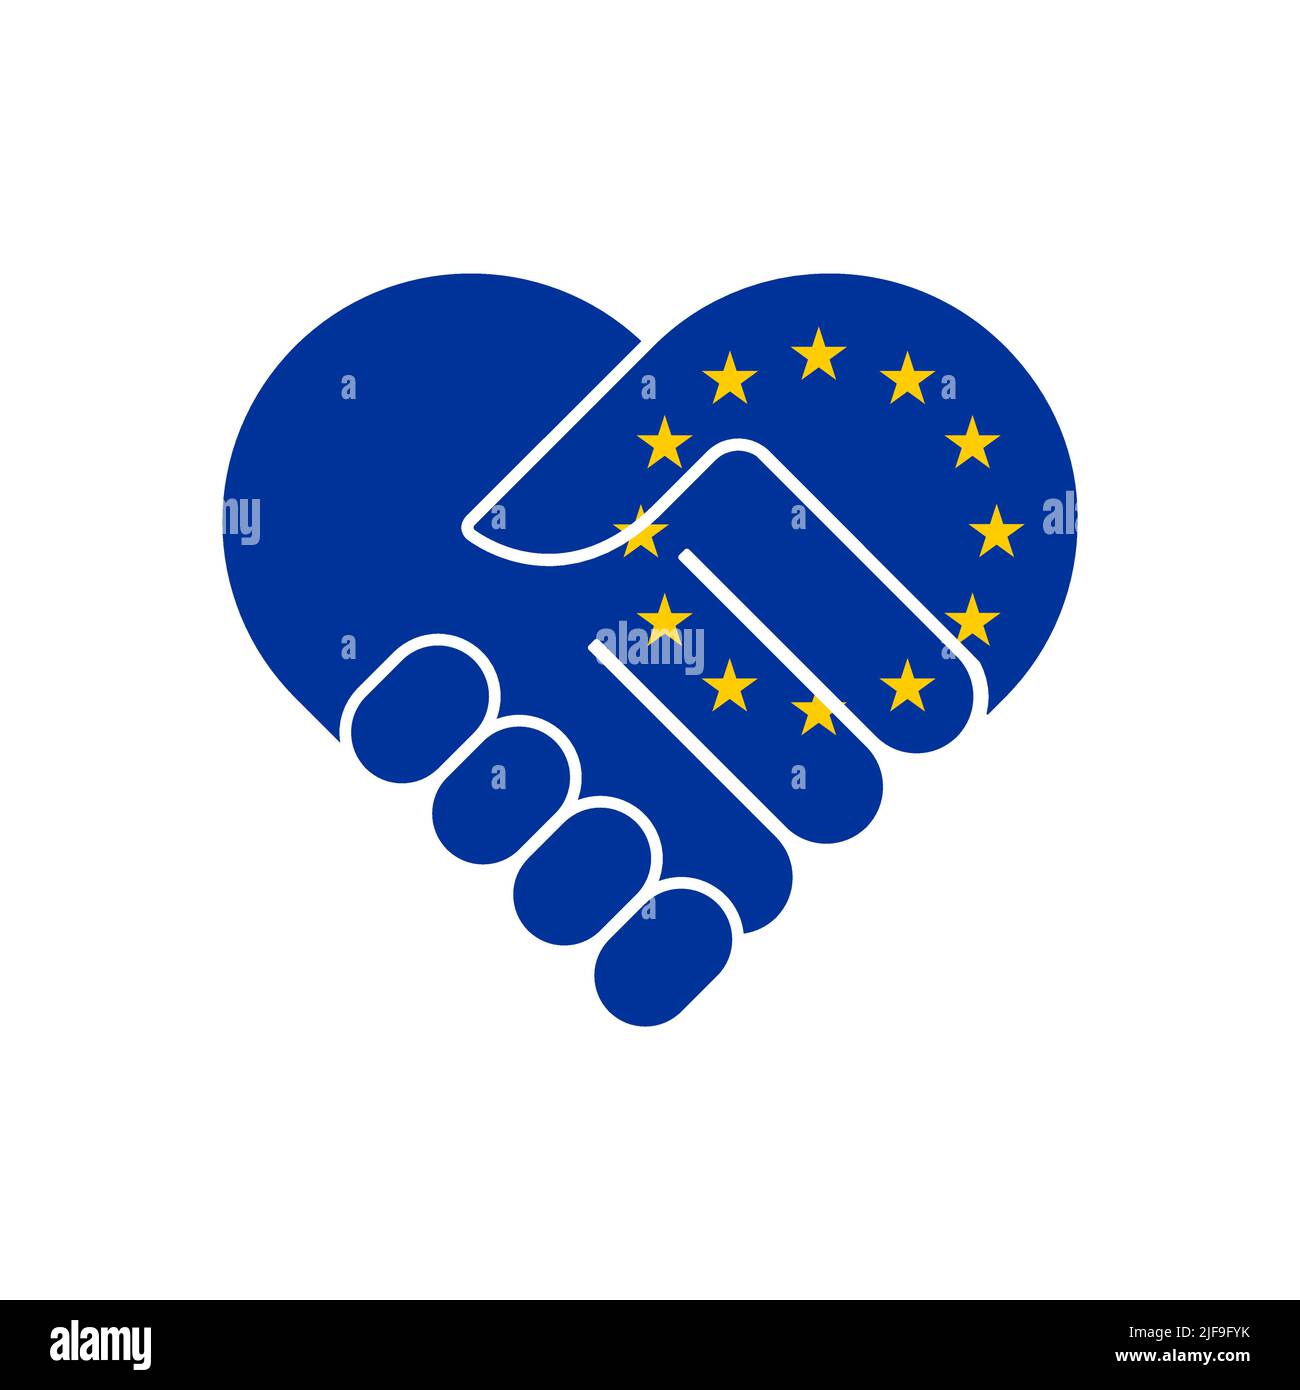 EU unity sign. Handshake heart with Euro Union flag. Flat vector illustration isolated on white background. Stock Vector